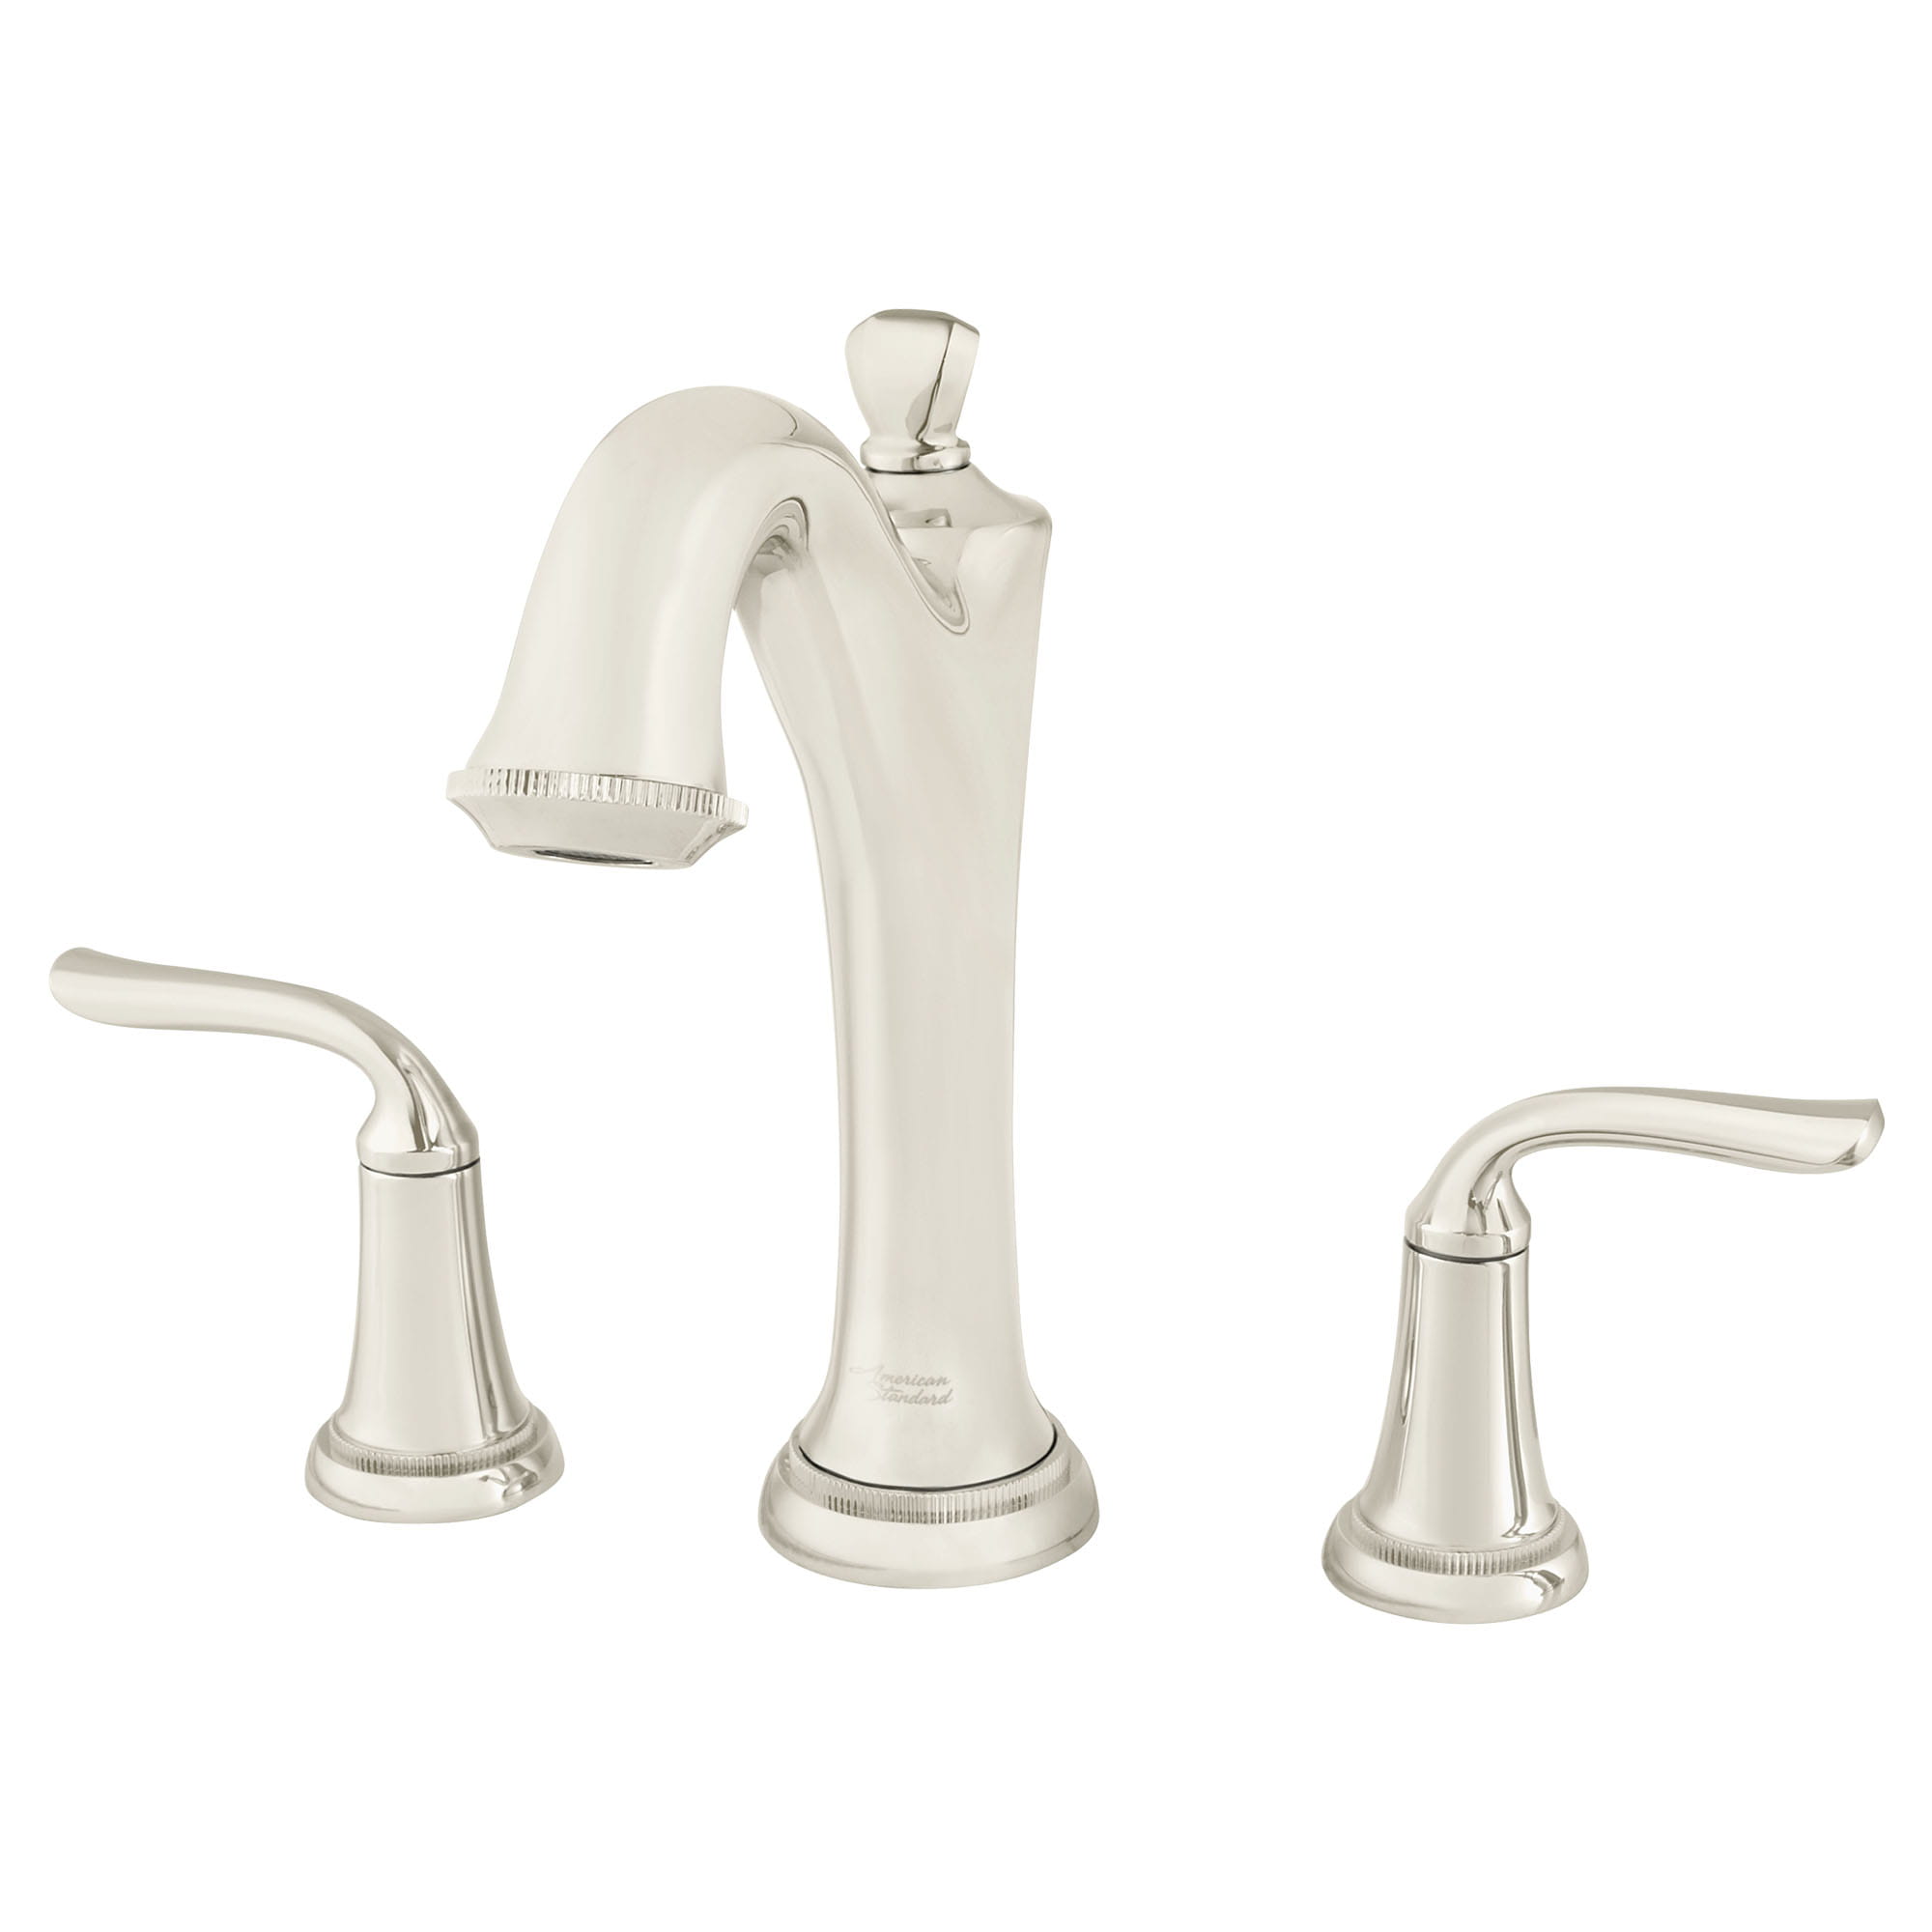 Patience® Bathtub Faucet With Lever Handles for Flash® Rough-In Valve